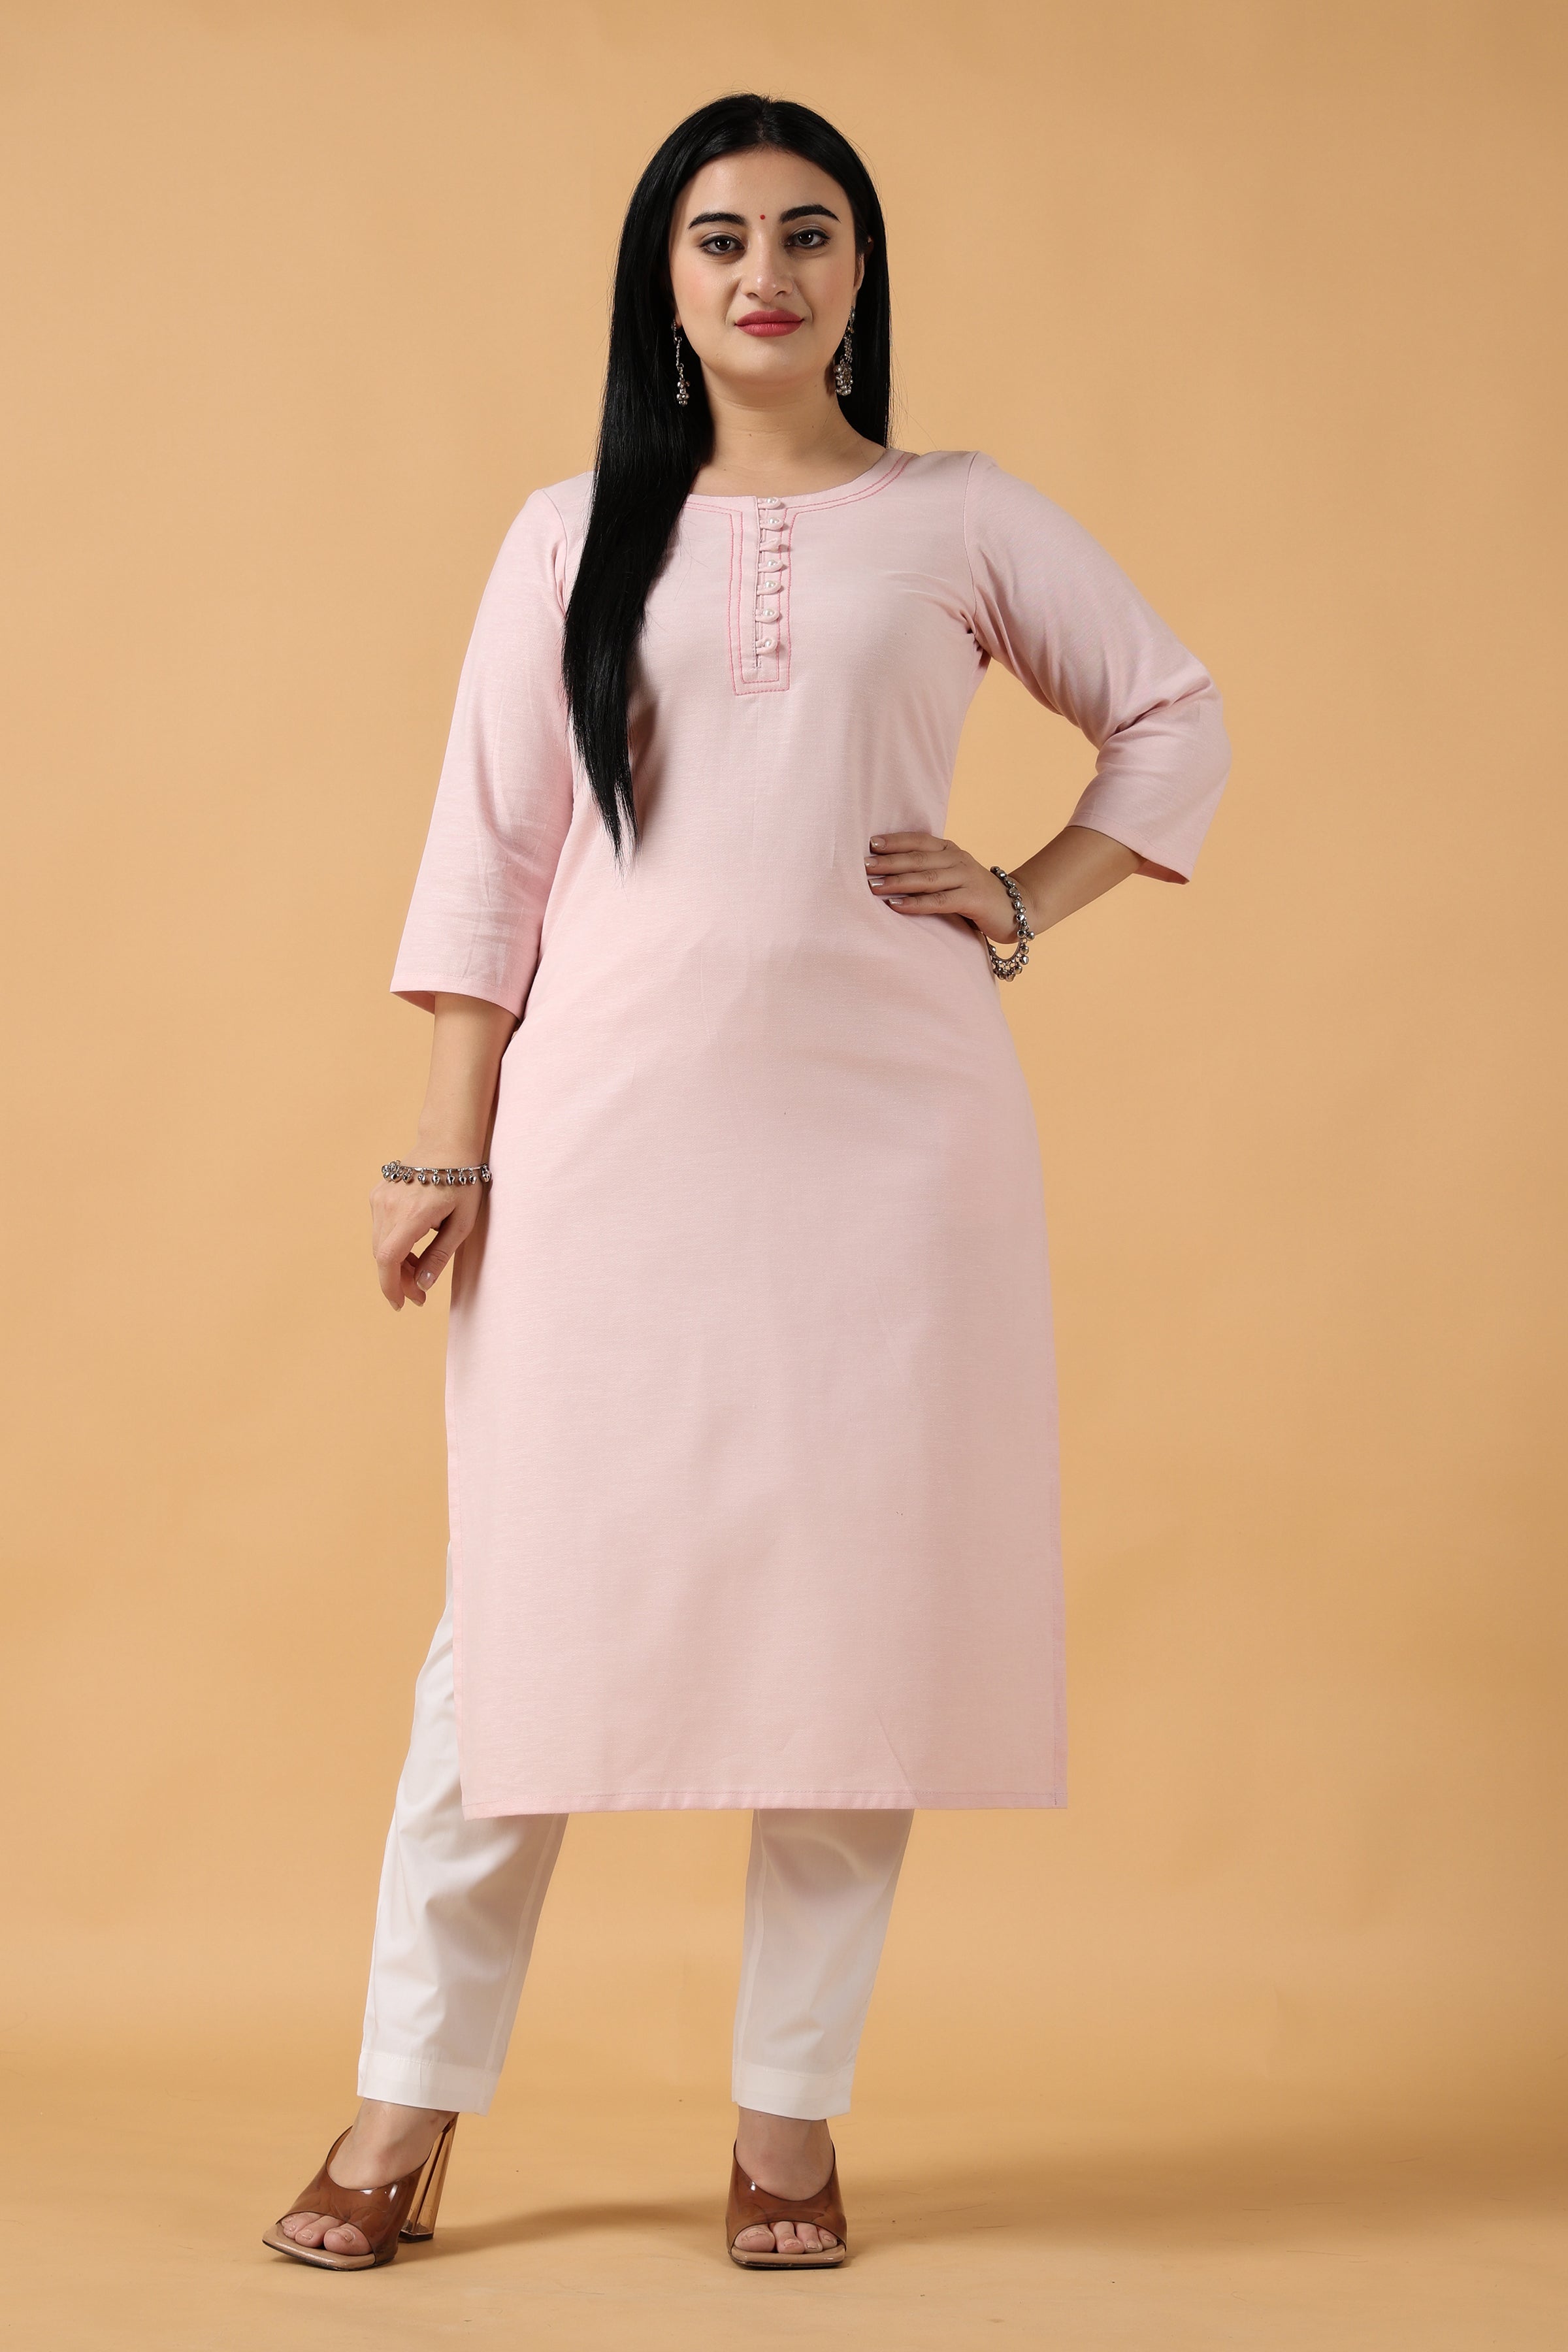 Indian Stitched Pink Chikan Kurti Cotton Top Casual Shirt in Size 36-46 |  eBay